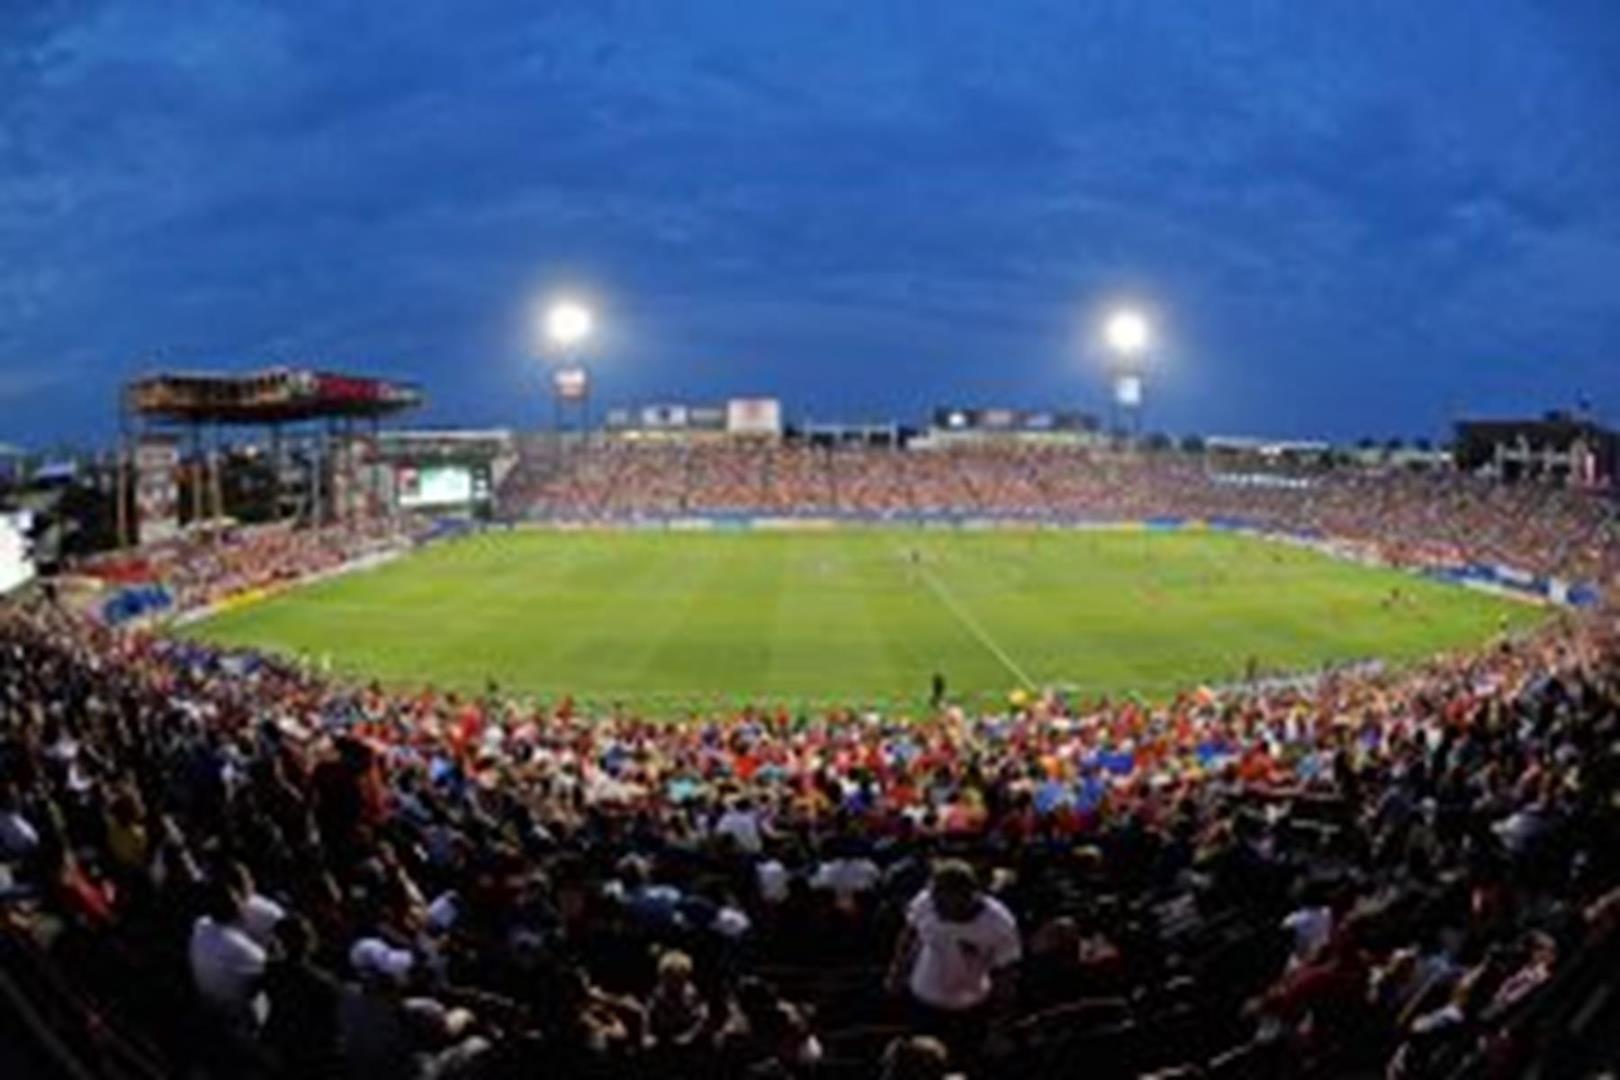 Jul 4, 2013; Frisco, TX, USA; A view of the field during the match between FC Dallas and Chivas USA during the first half at FC Dallas Stadium. Mandatory Credit: Jerome Miron-USA TODAY Sports